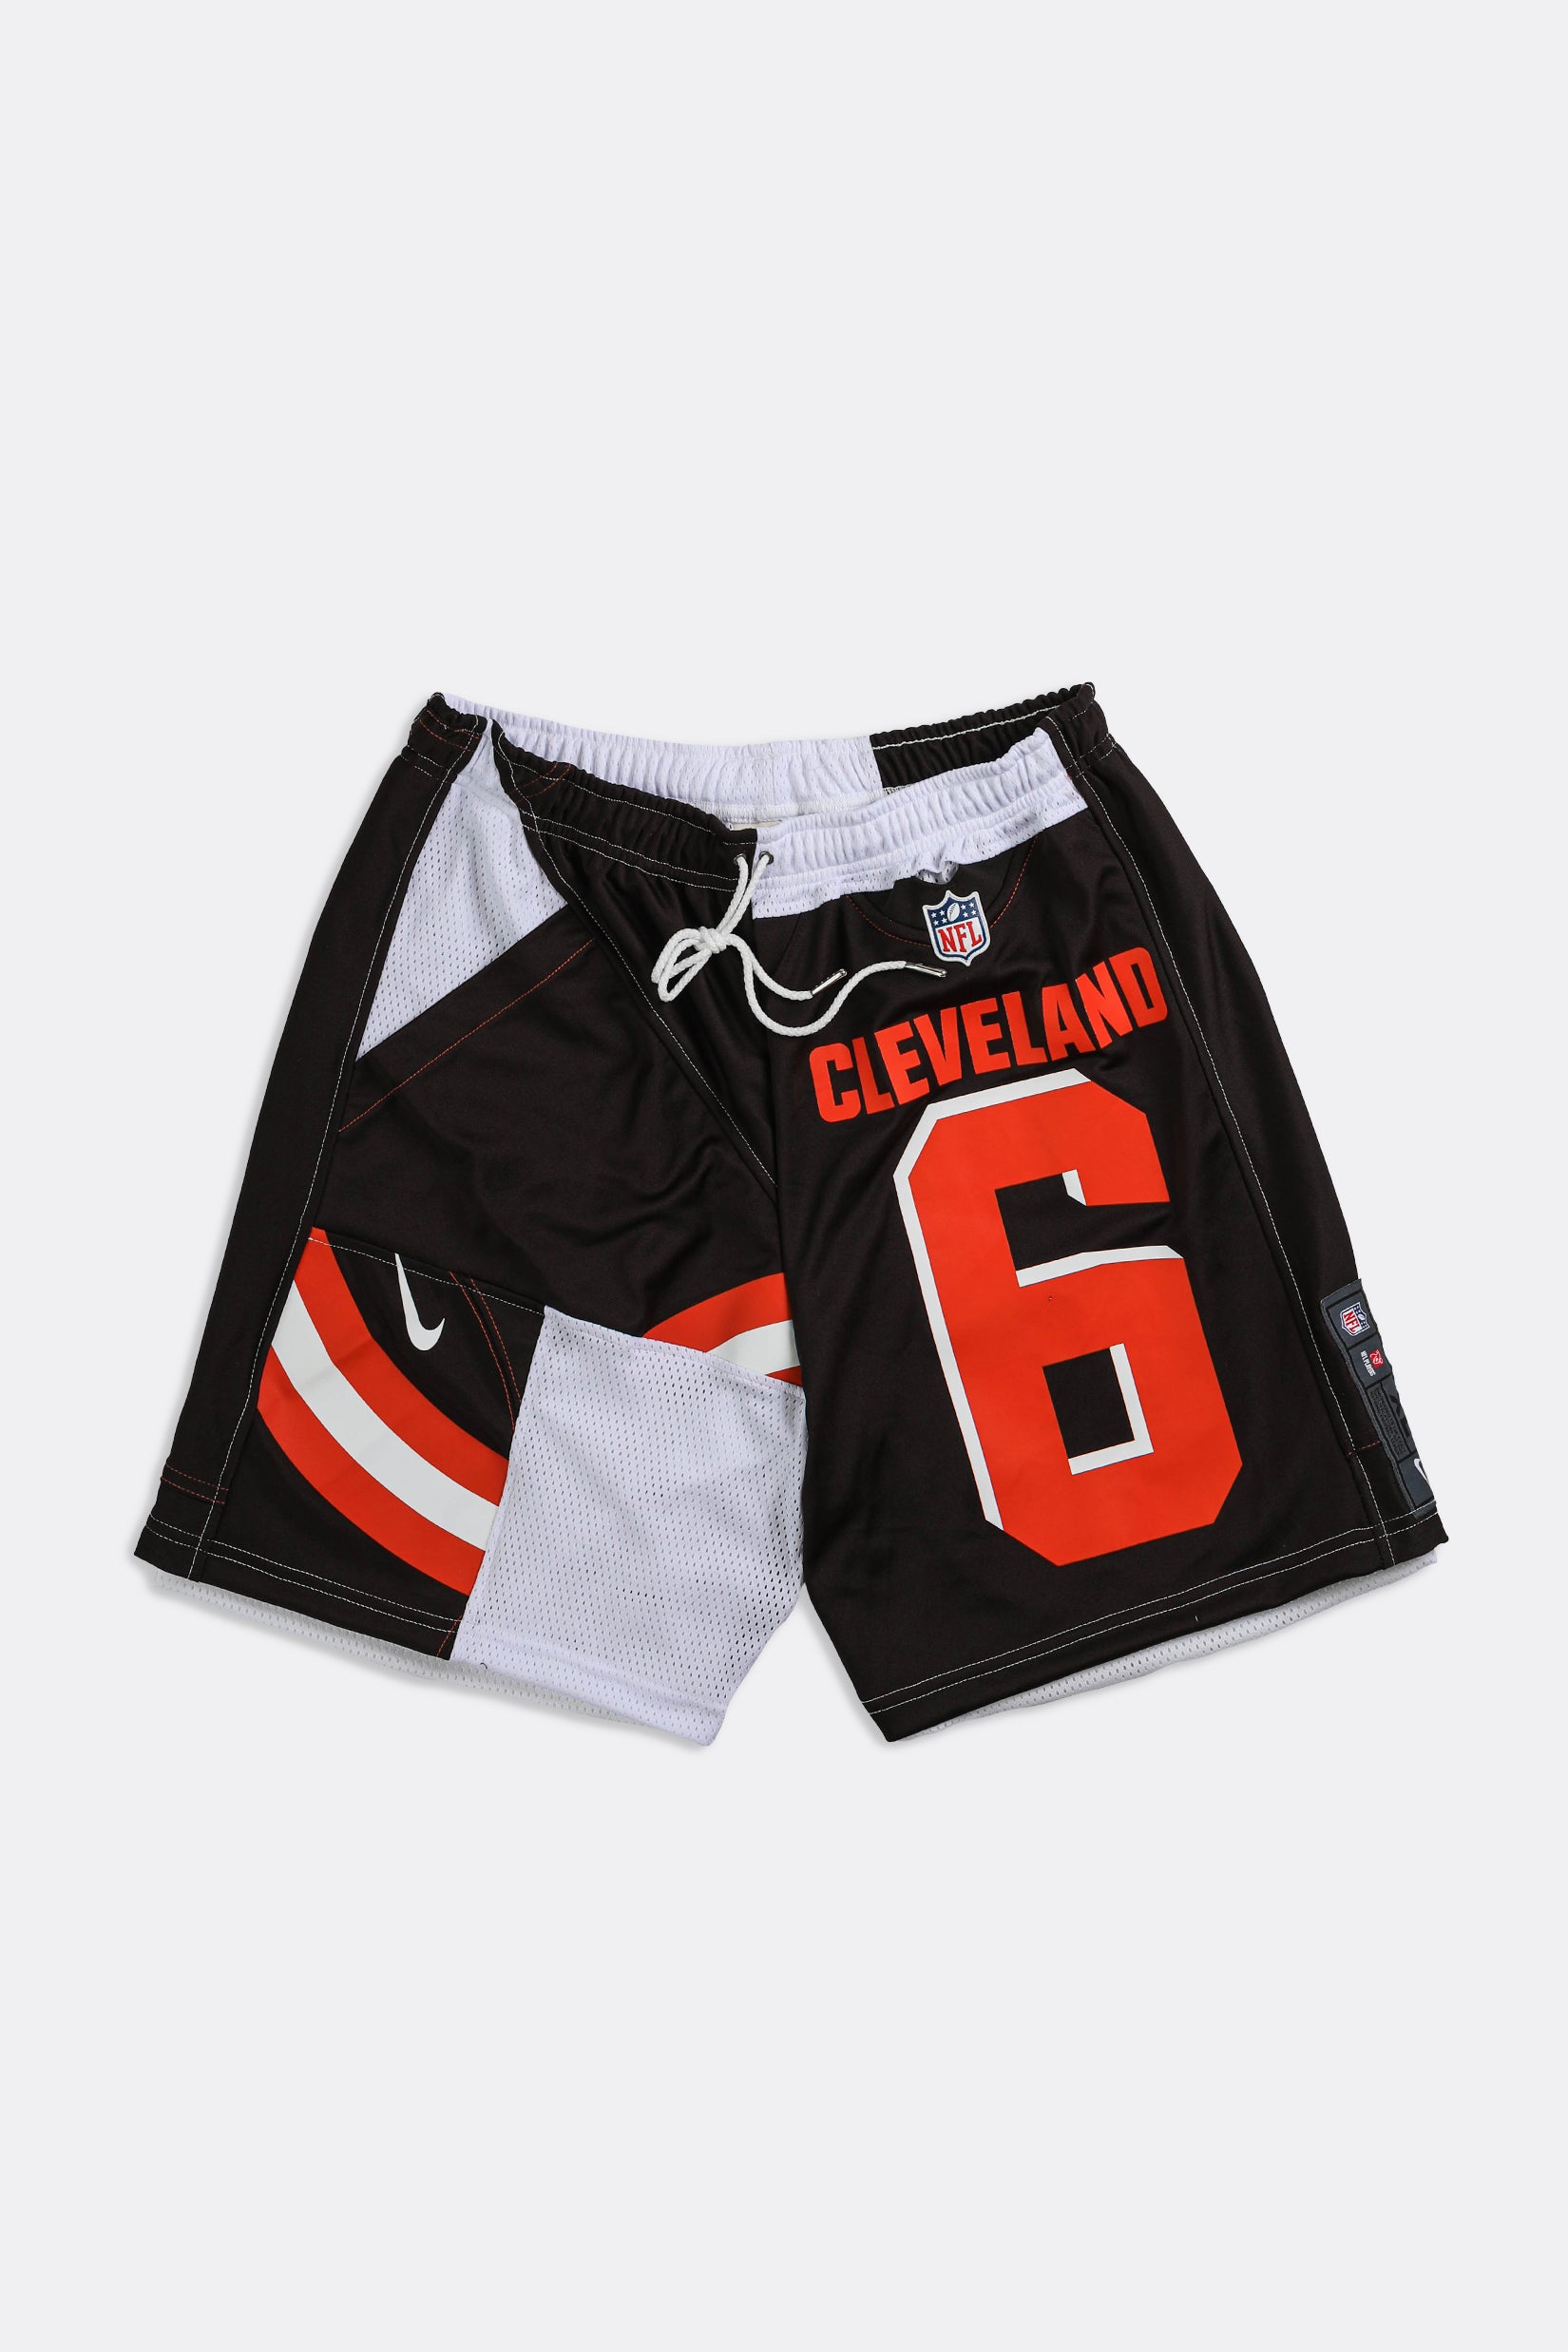 cleveland browns mesh jersey